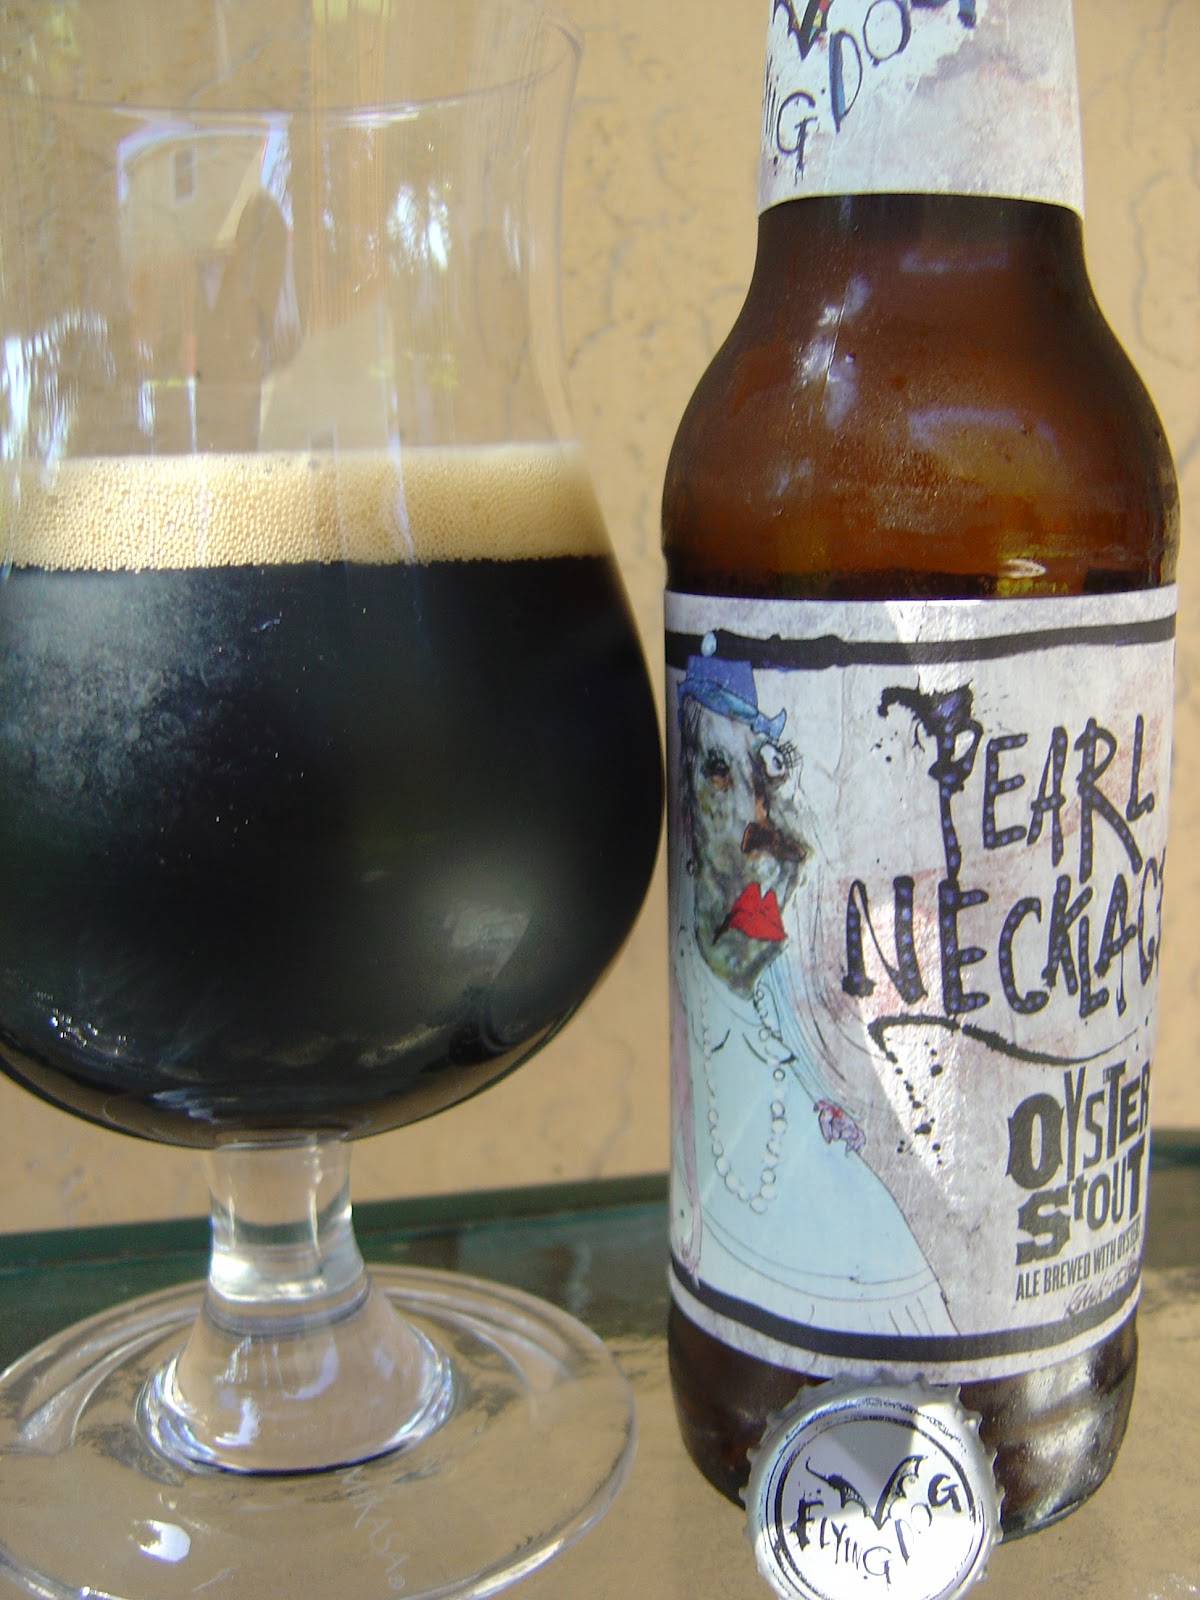 Flying Dog Pearl Necklace Oyster Stout.jpg